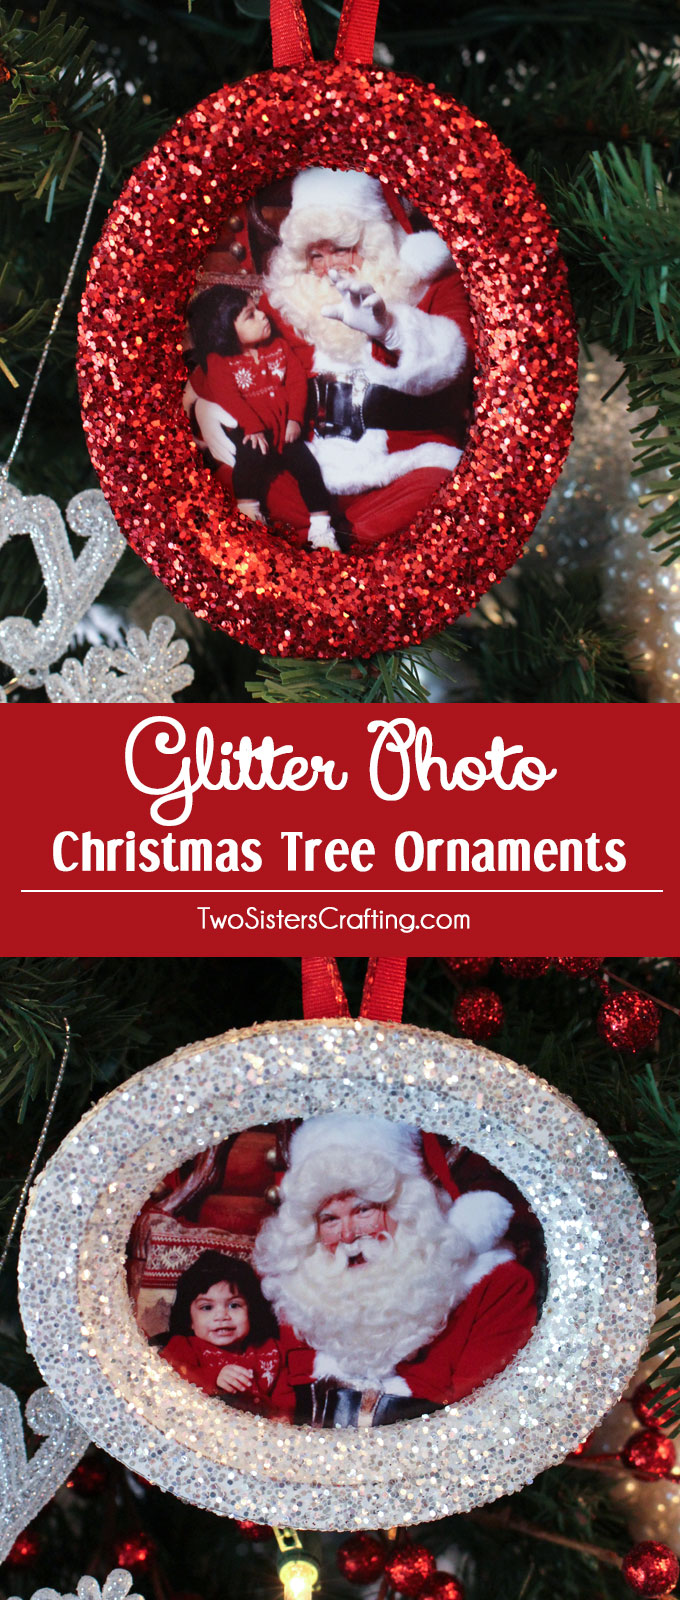 Download Glitter Photo Christmas Tree Ornaments - Two Sisters